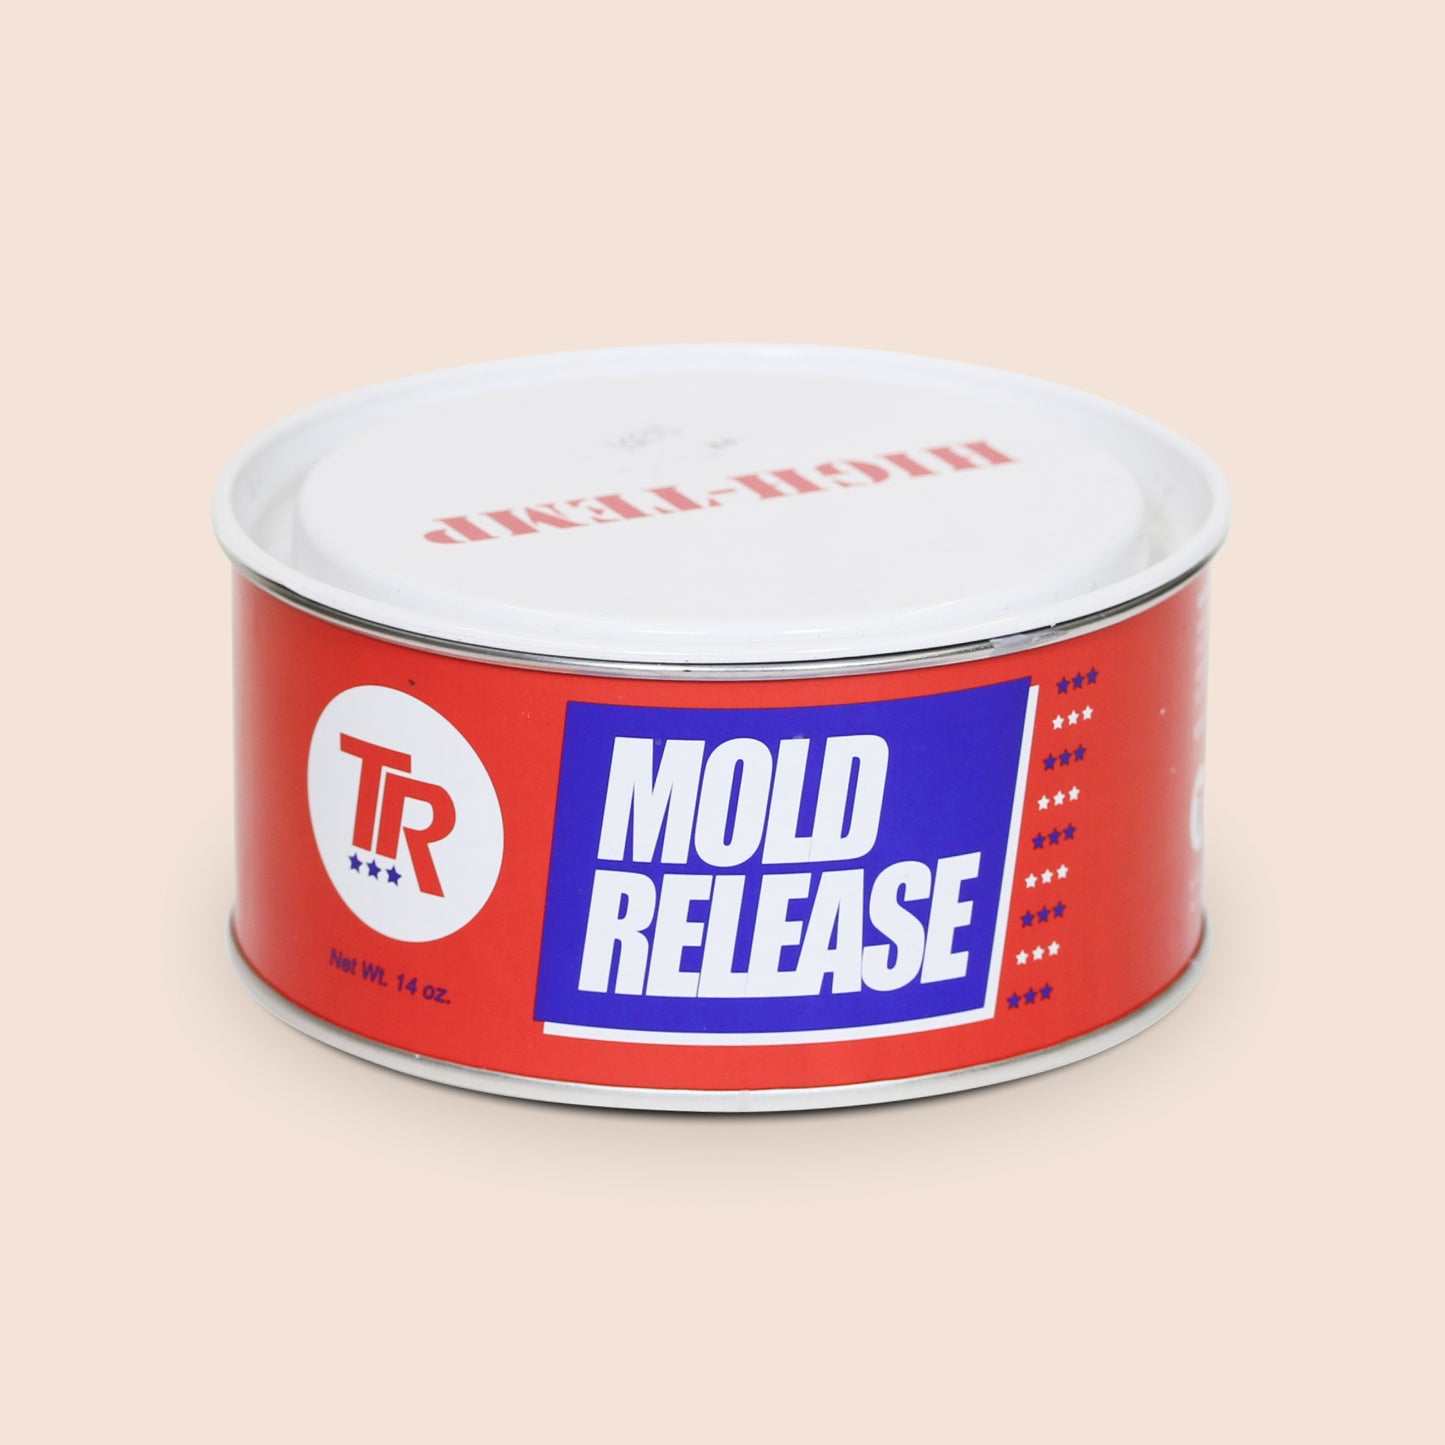 Mold release wax - Carbonexperience